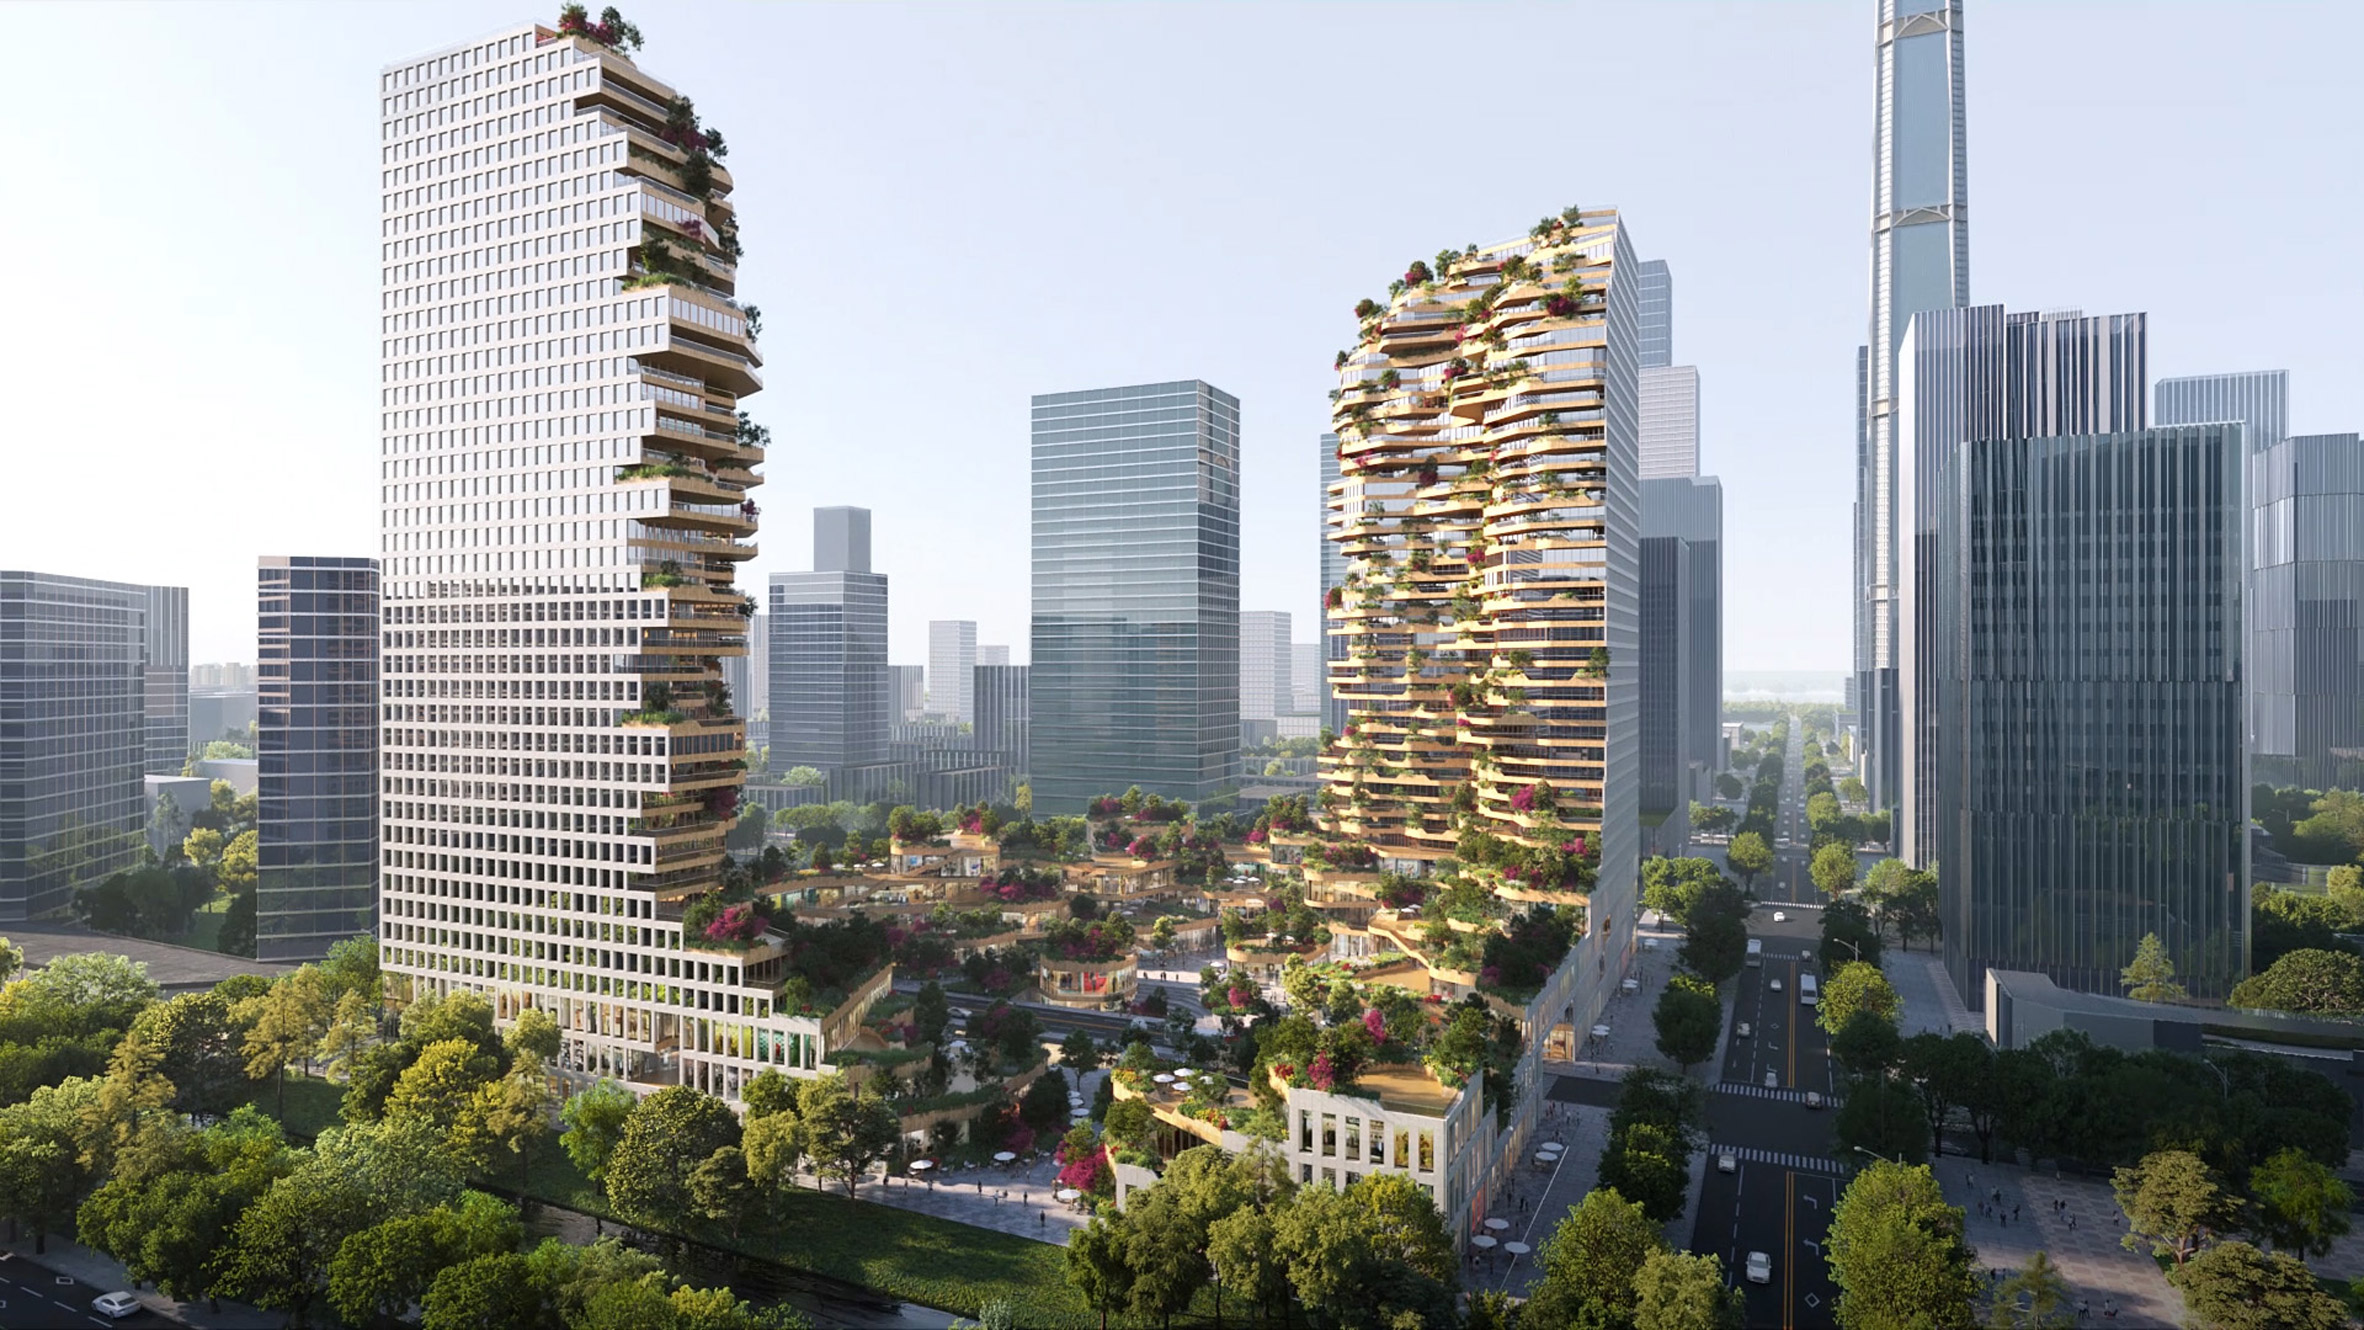 Render of the gridded exterior of Oasis Towers and its plant line interior facades